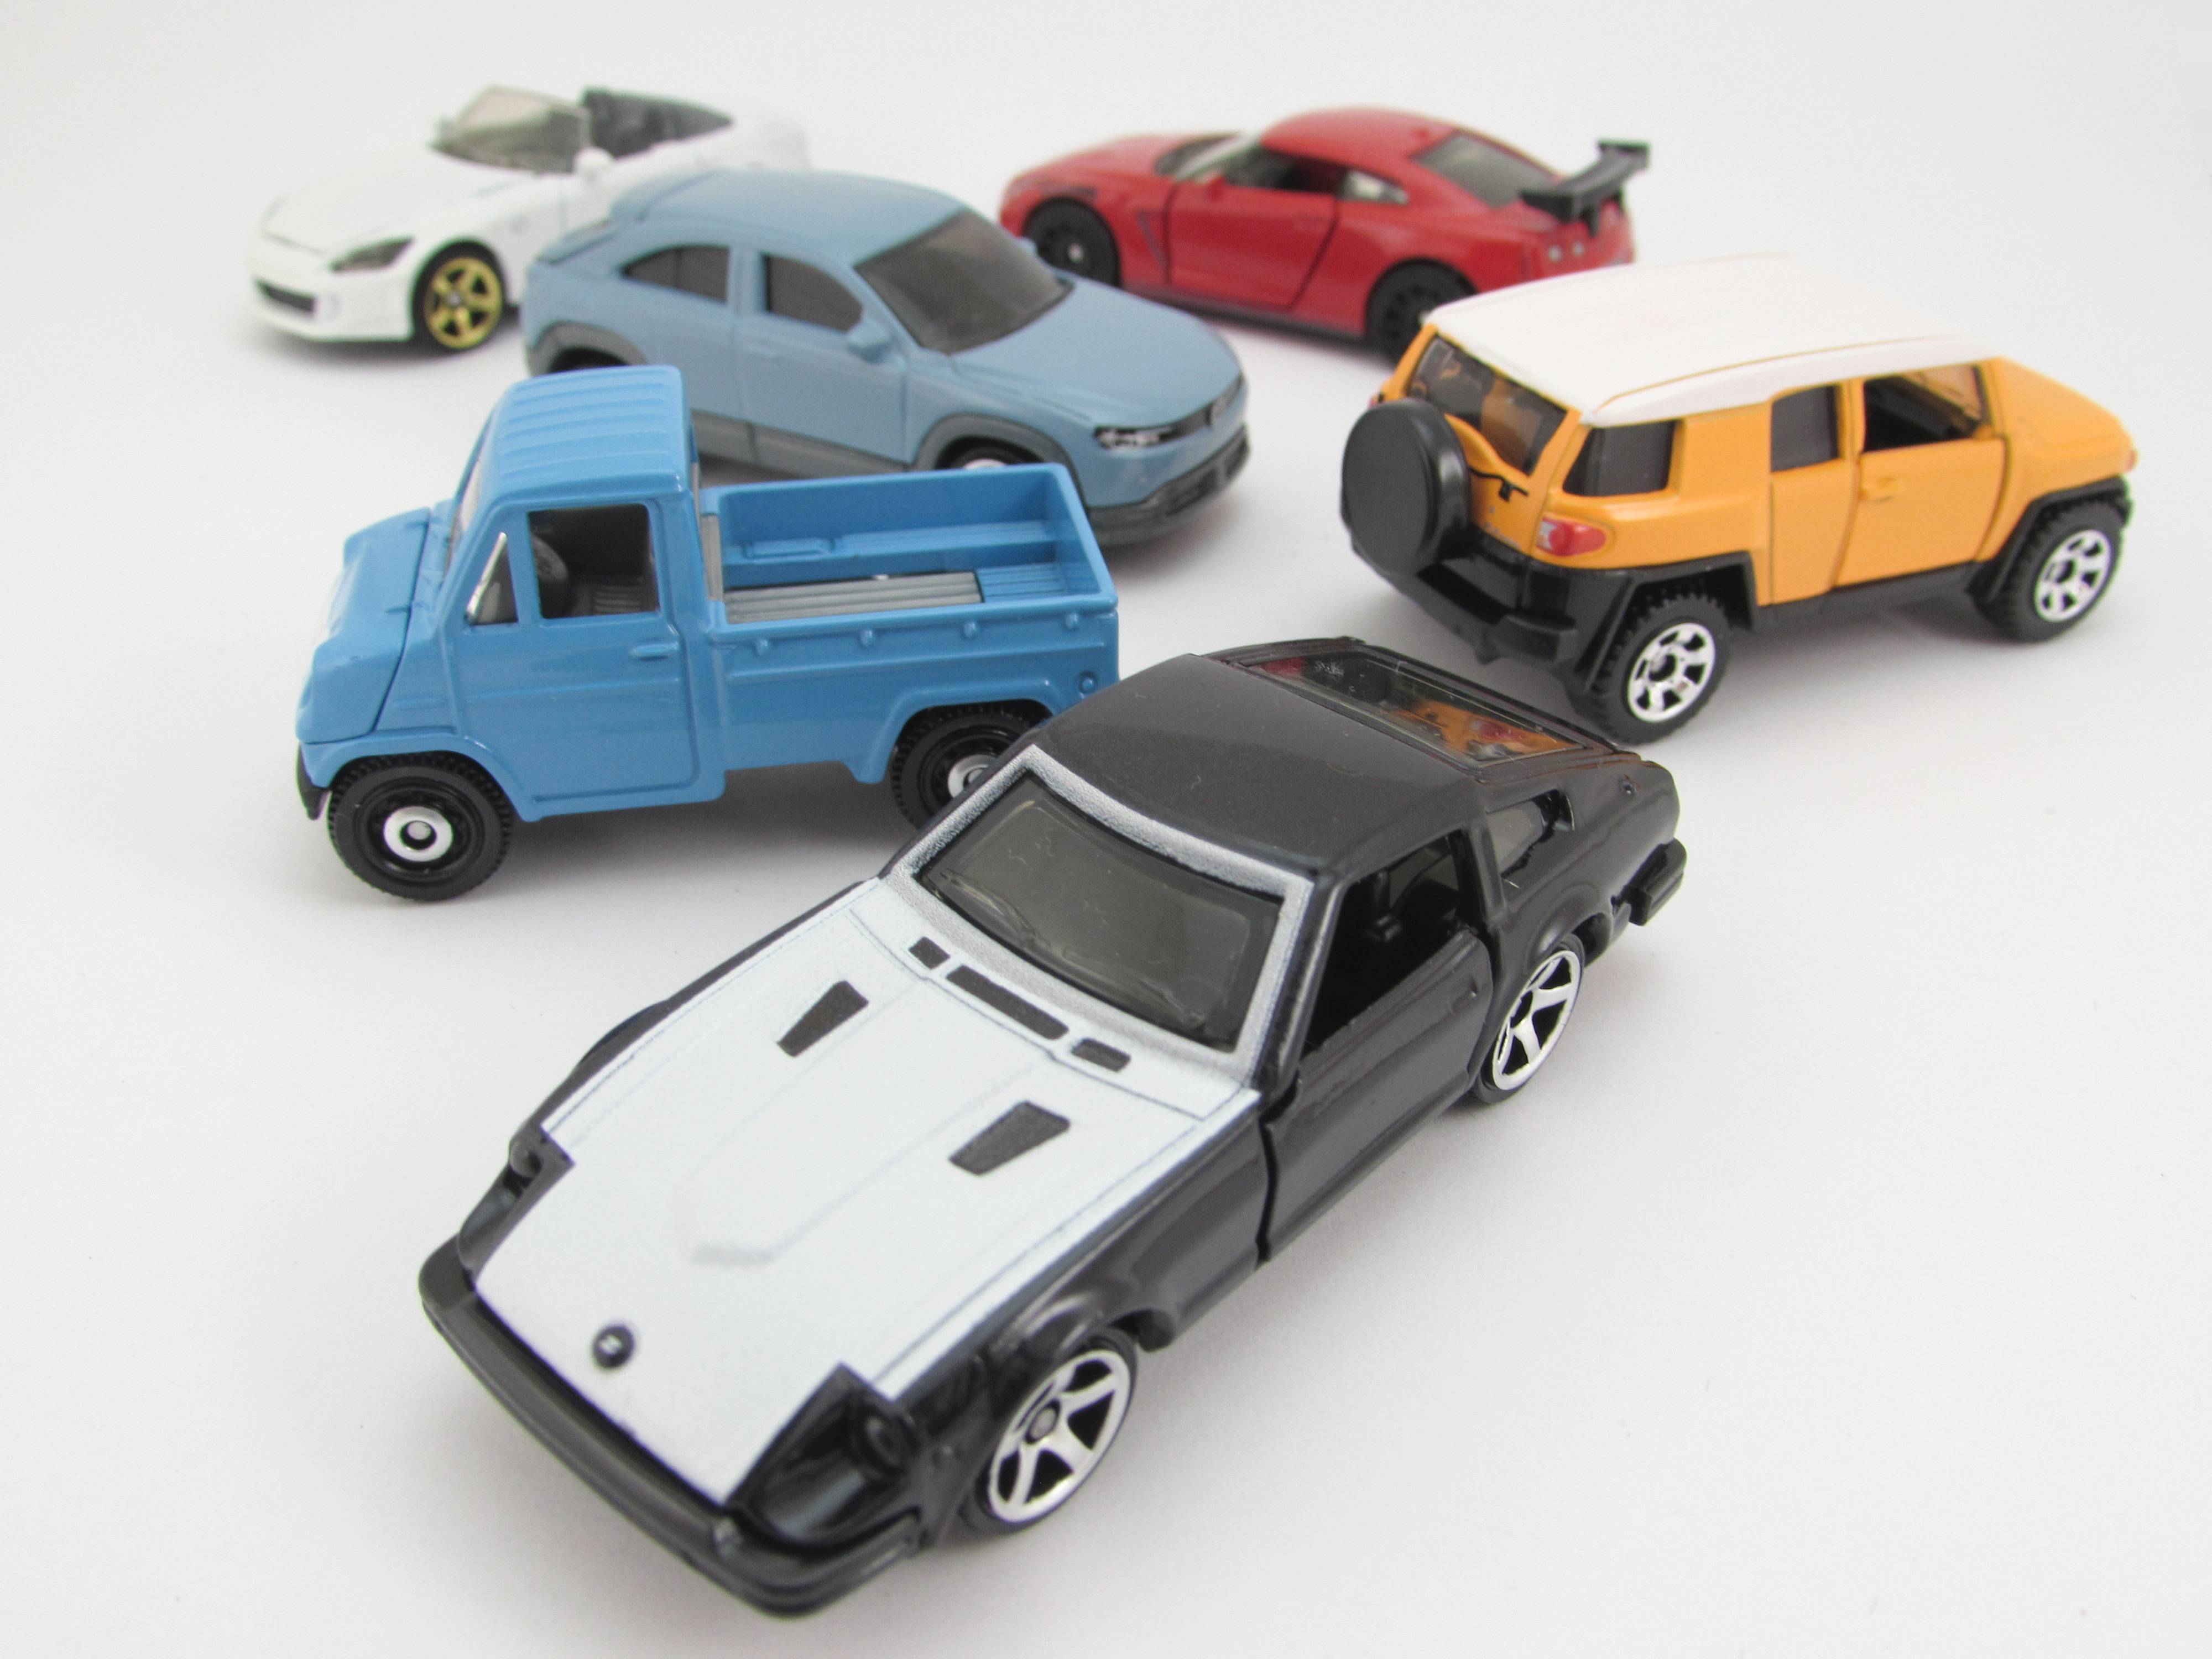 Matchbox Monday heads on over to Japan – Wheelcollectors LLC